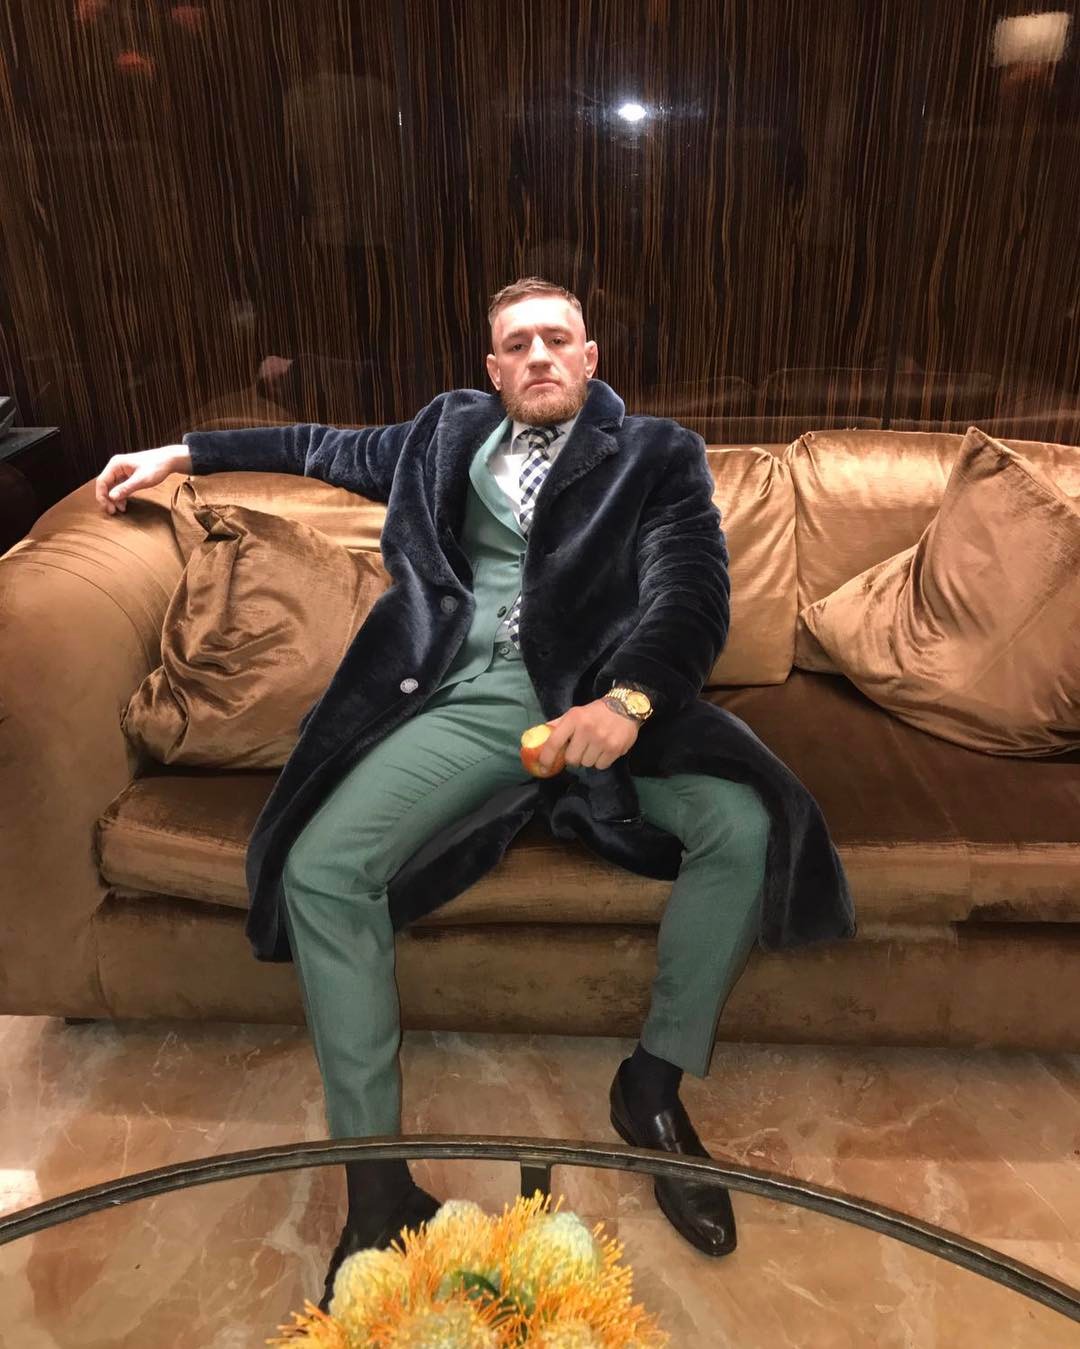 SPOTTED: Conor McGregor In Louis Vuitton Fur Coat And David August Suit